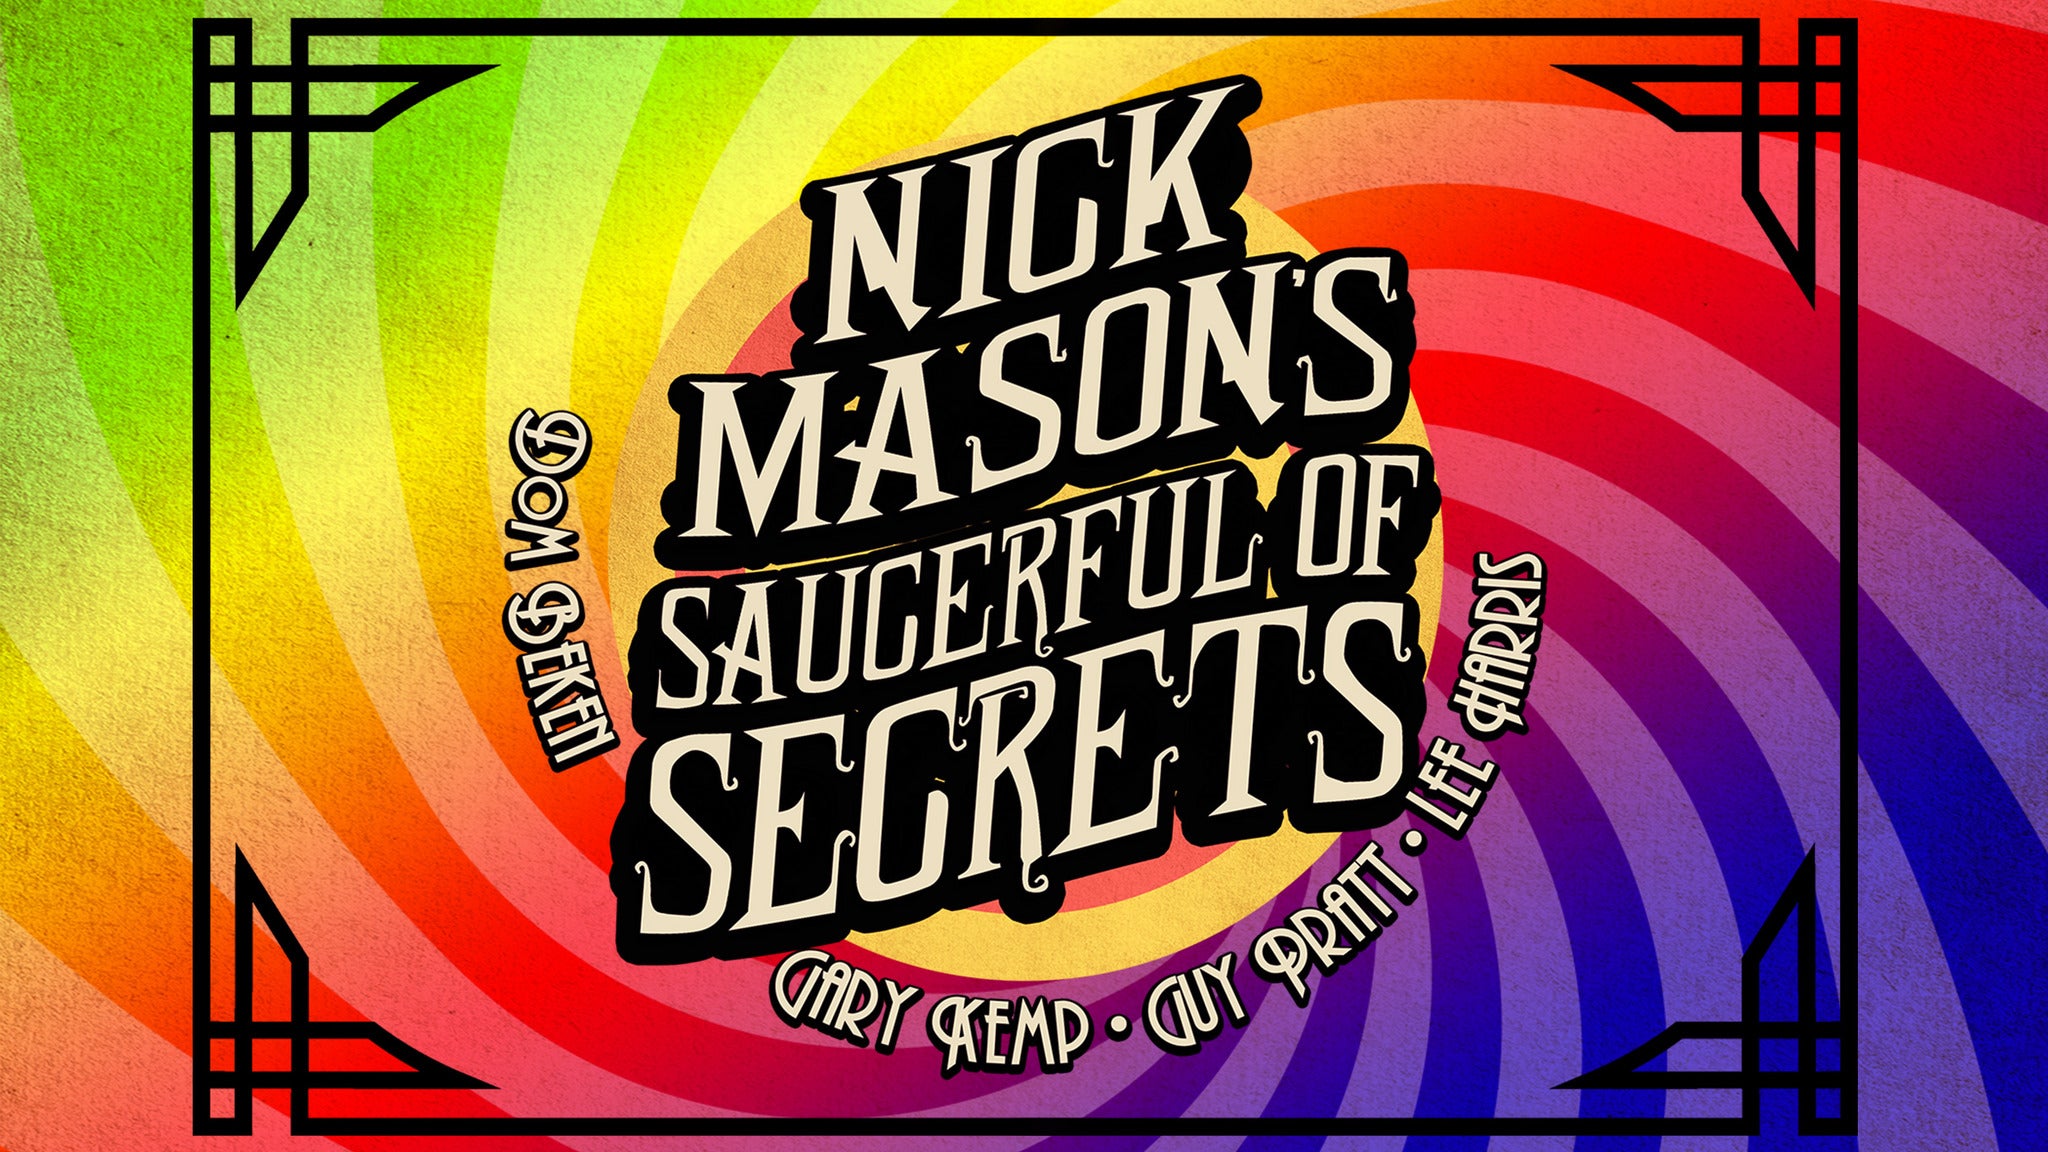 Nick Mason's Saucerful Of Secrets presale code for show tickets in St. Louis, MO (Stifel Theatre)